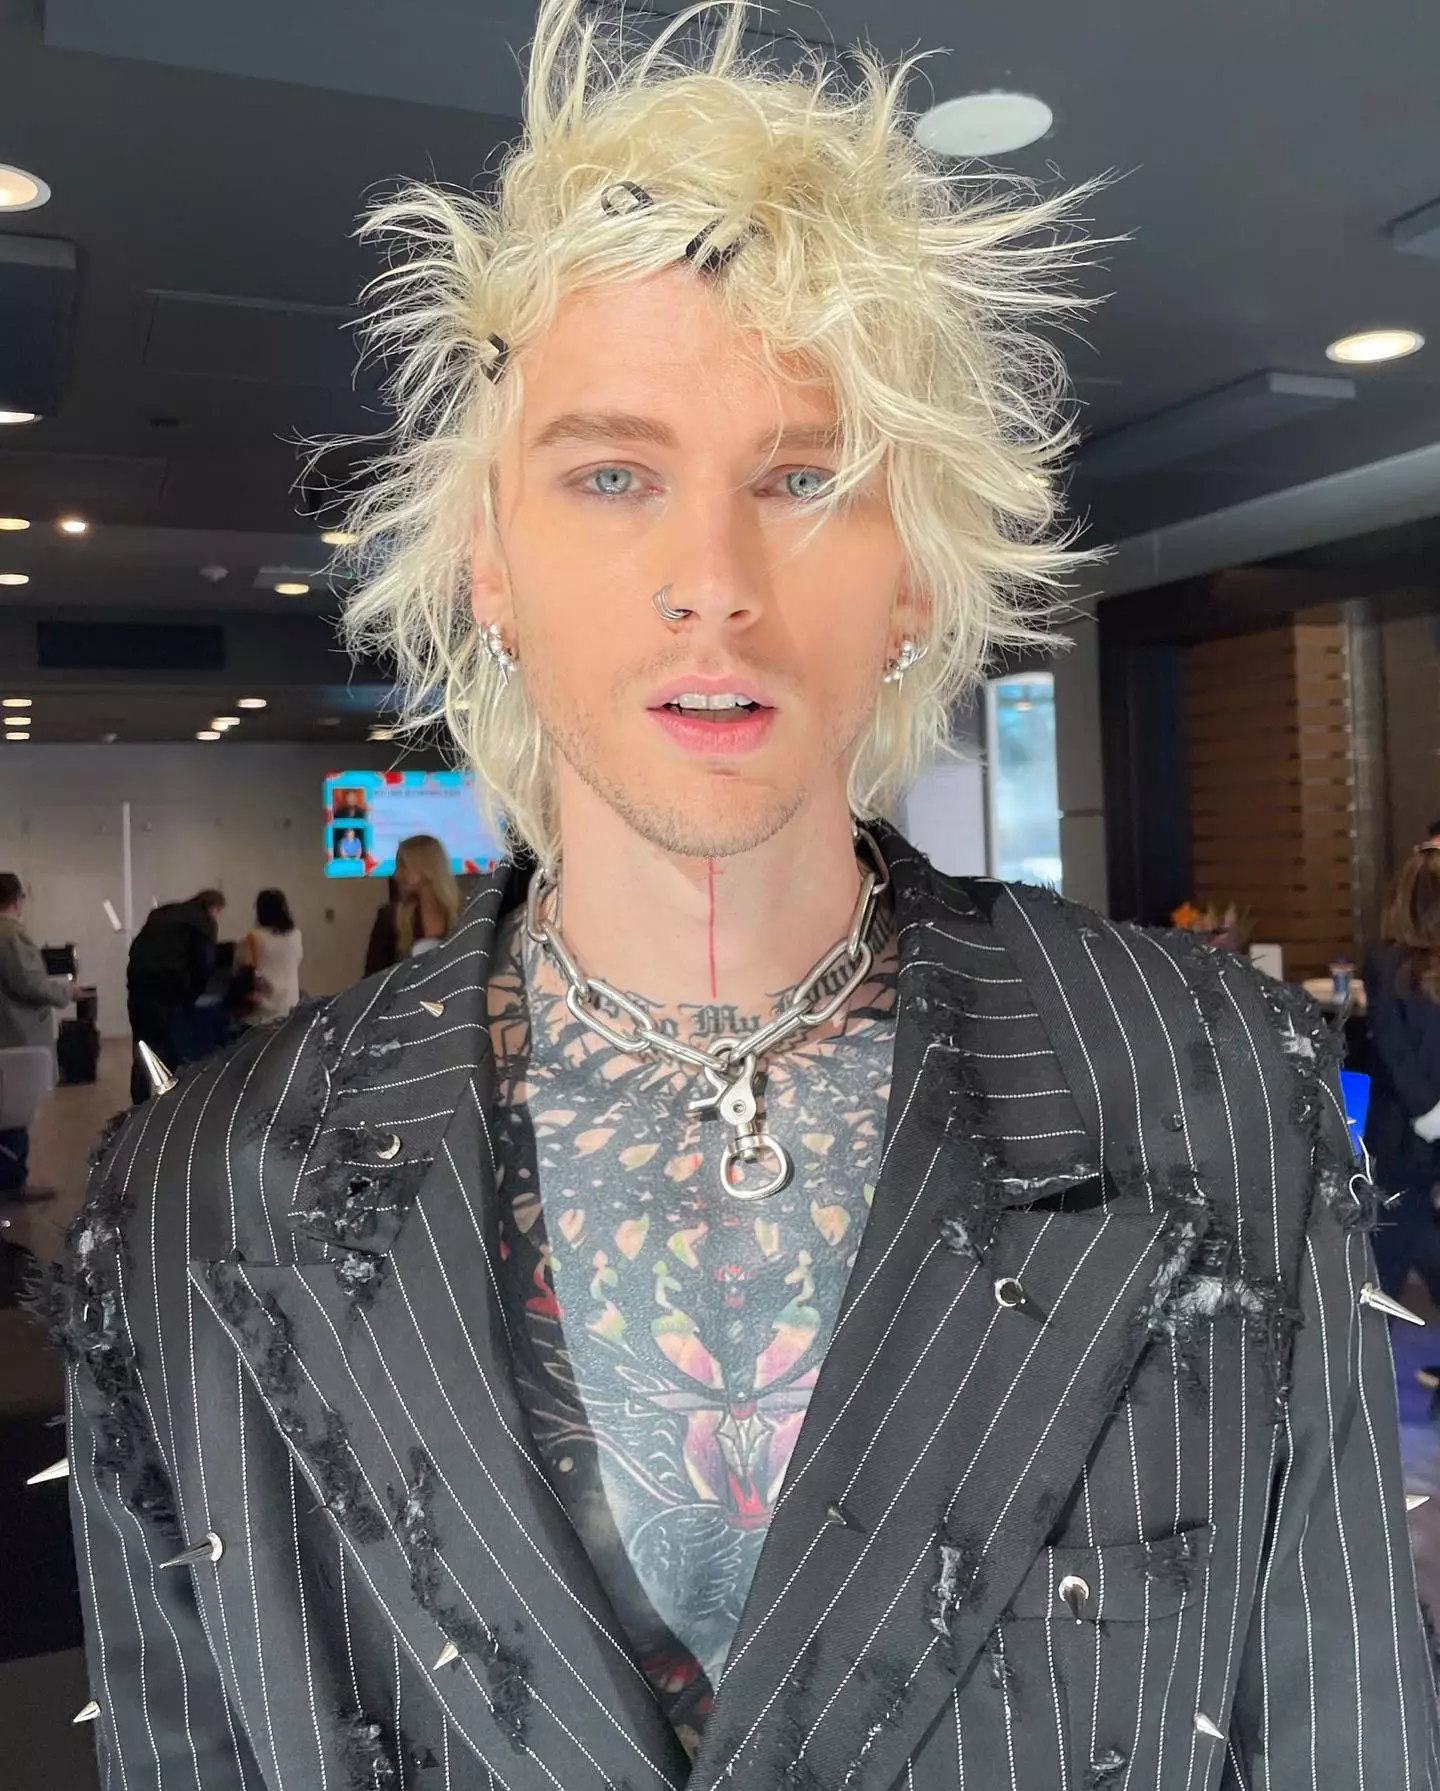 Apparently Machine Gun Kelly wants to just go by 'Machine' now.